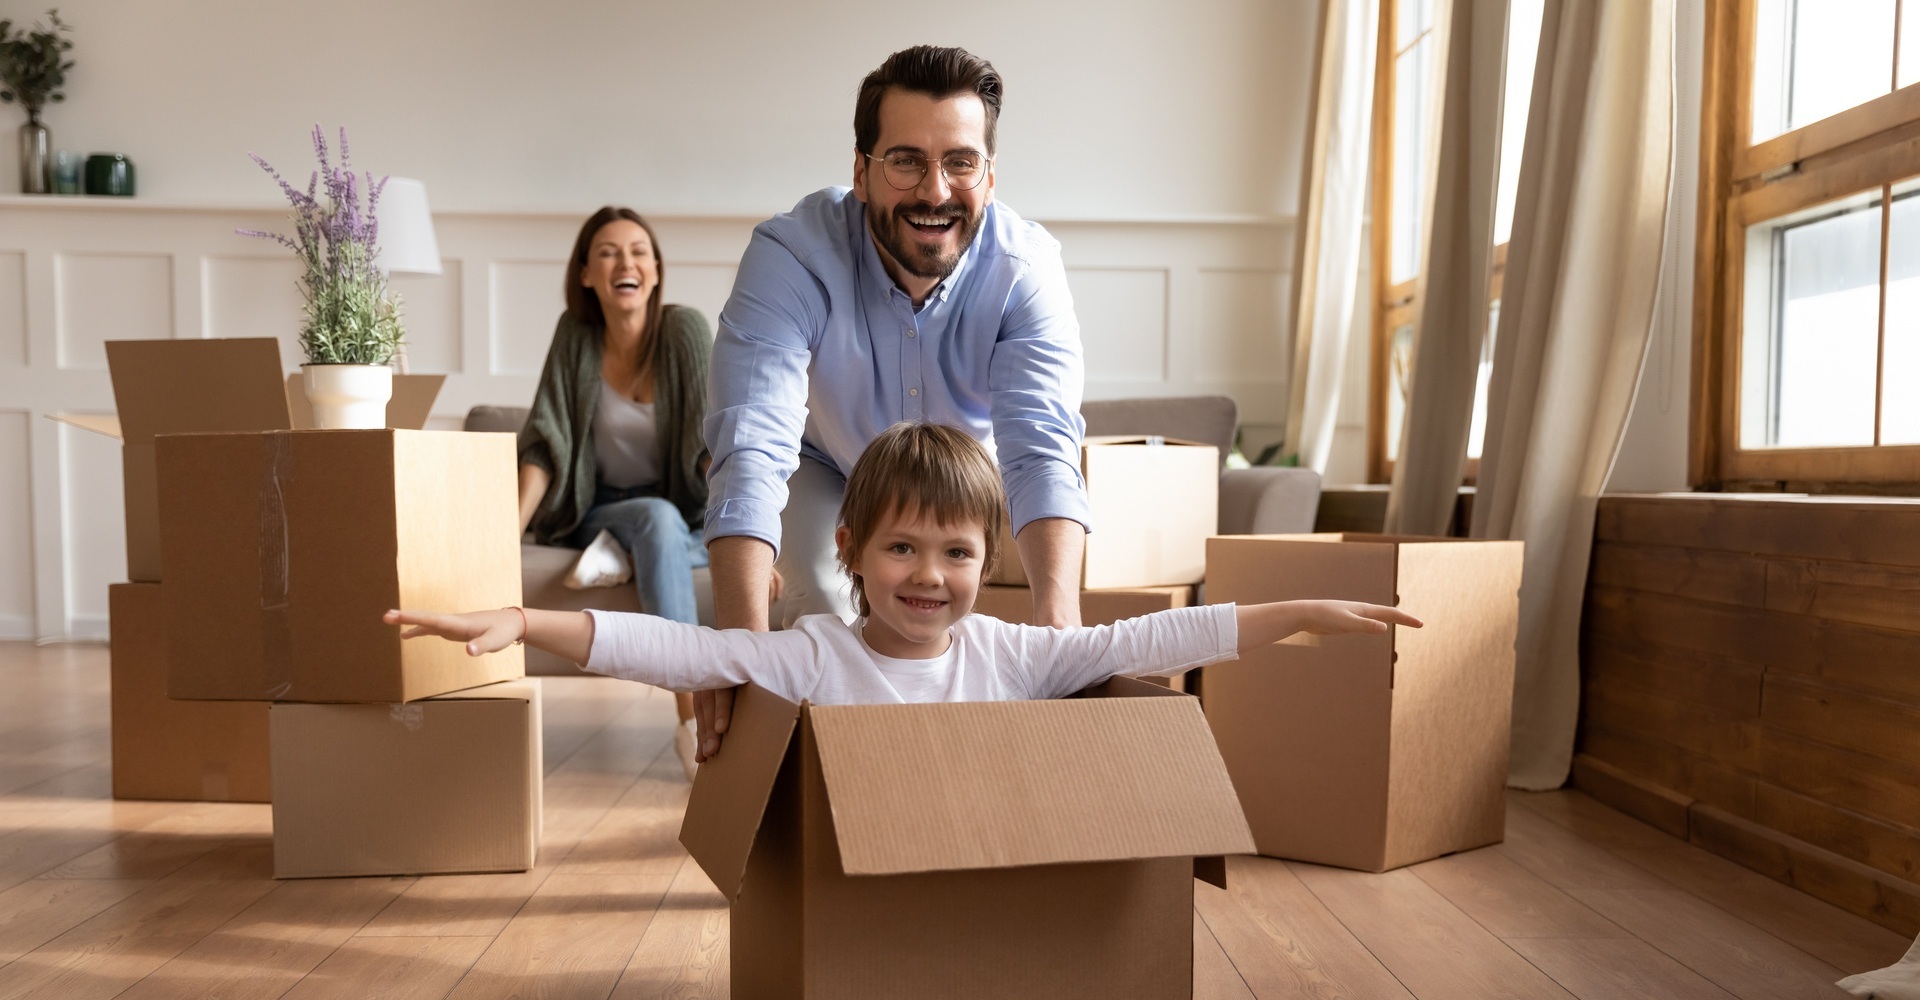 Two parents with their kid playing in a box